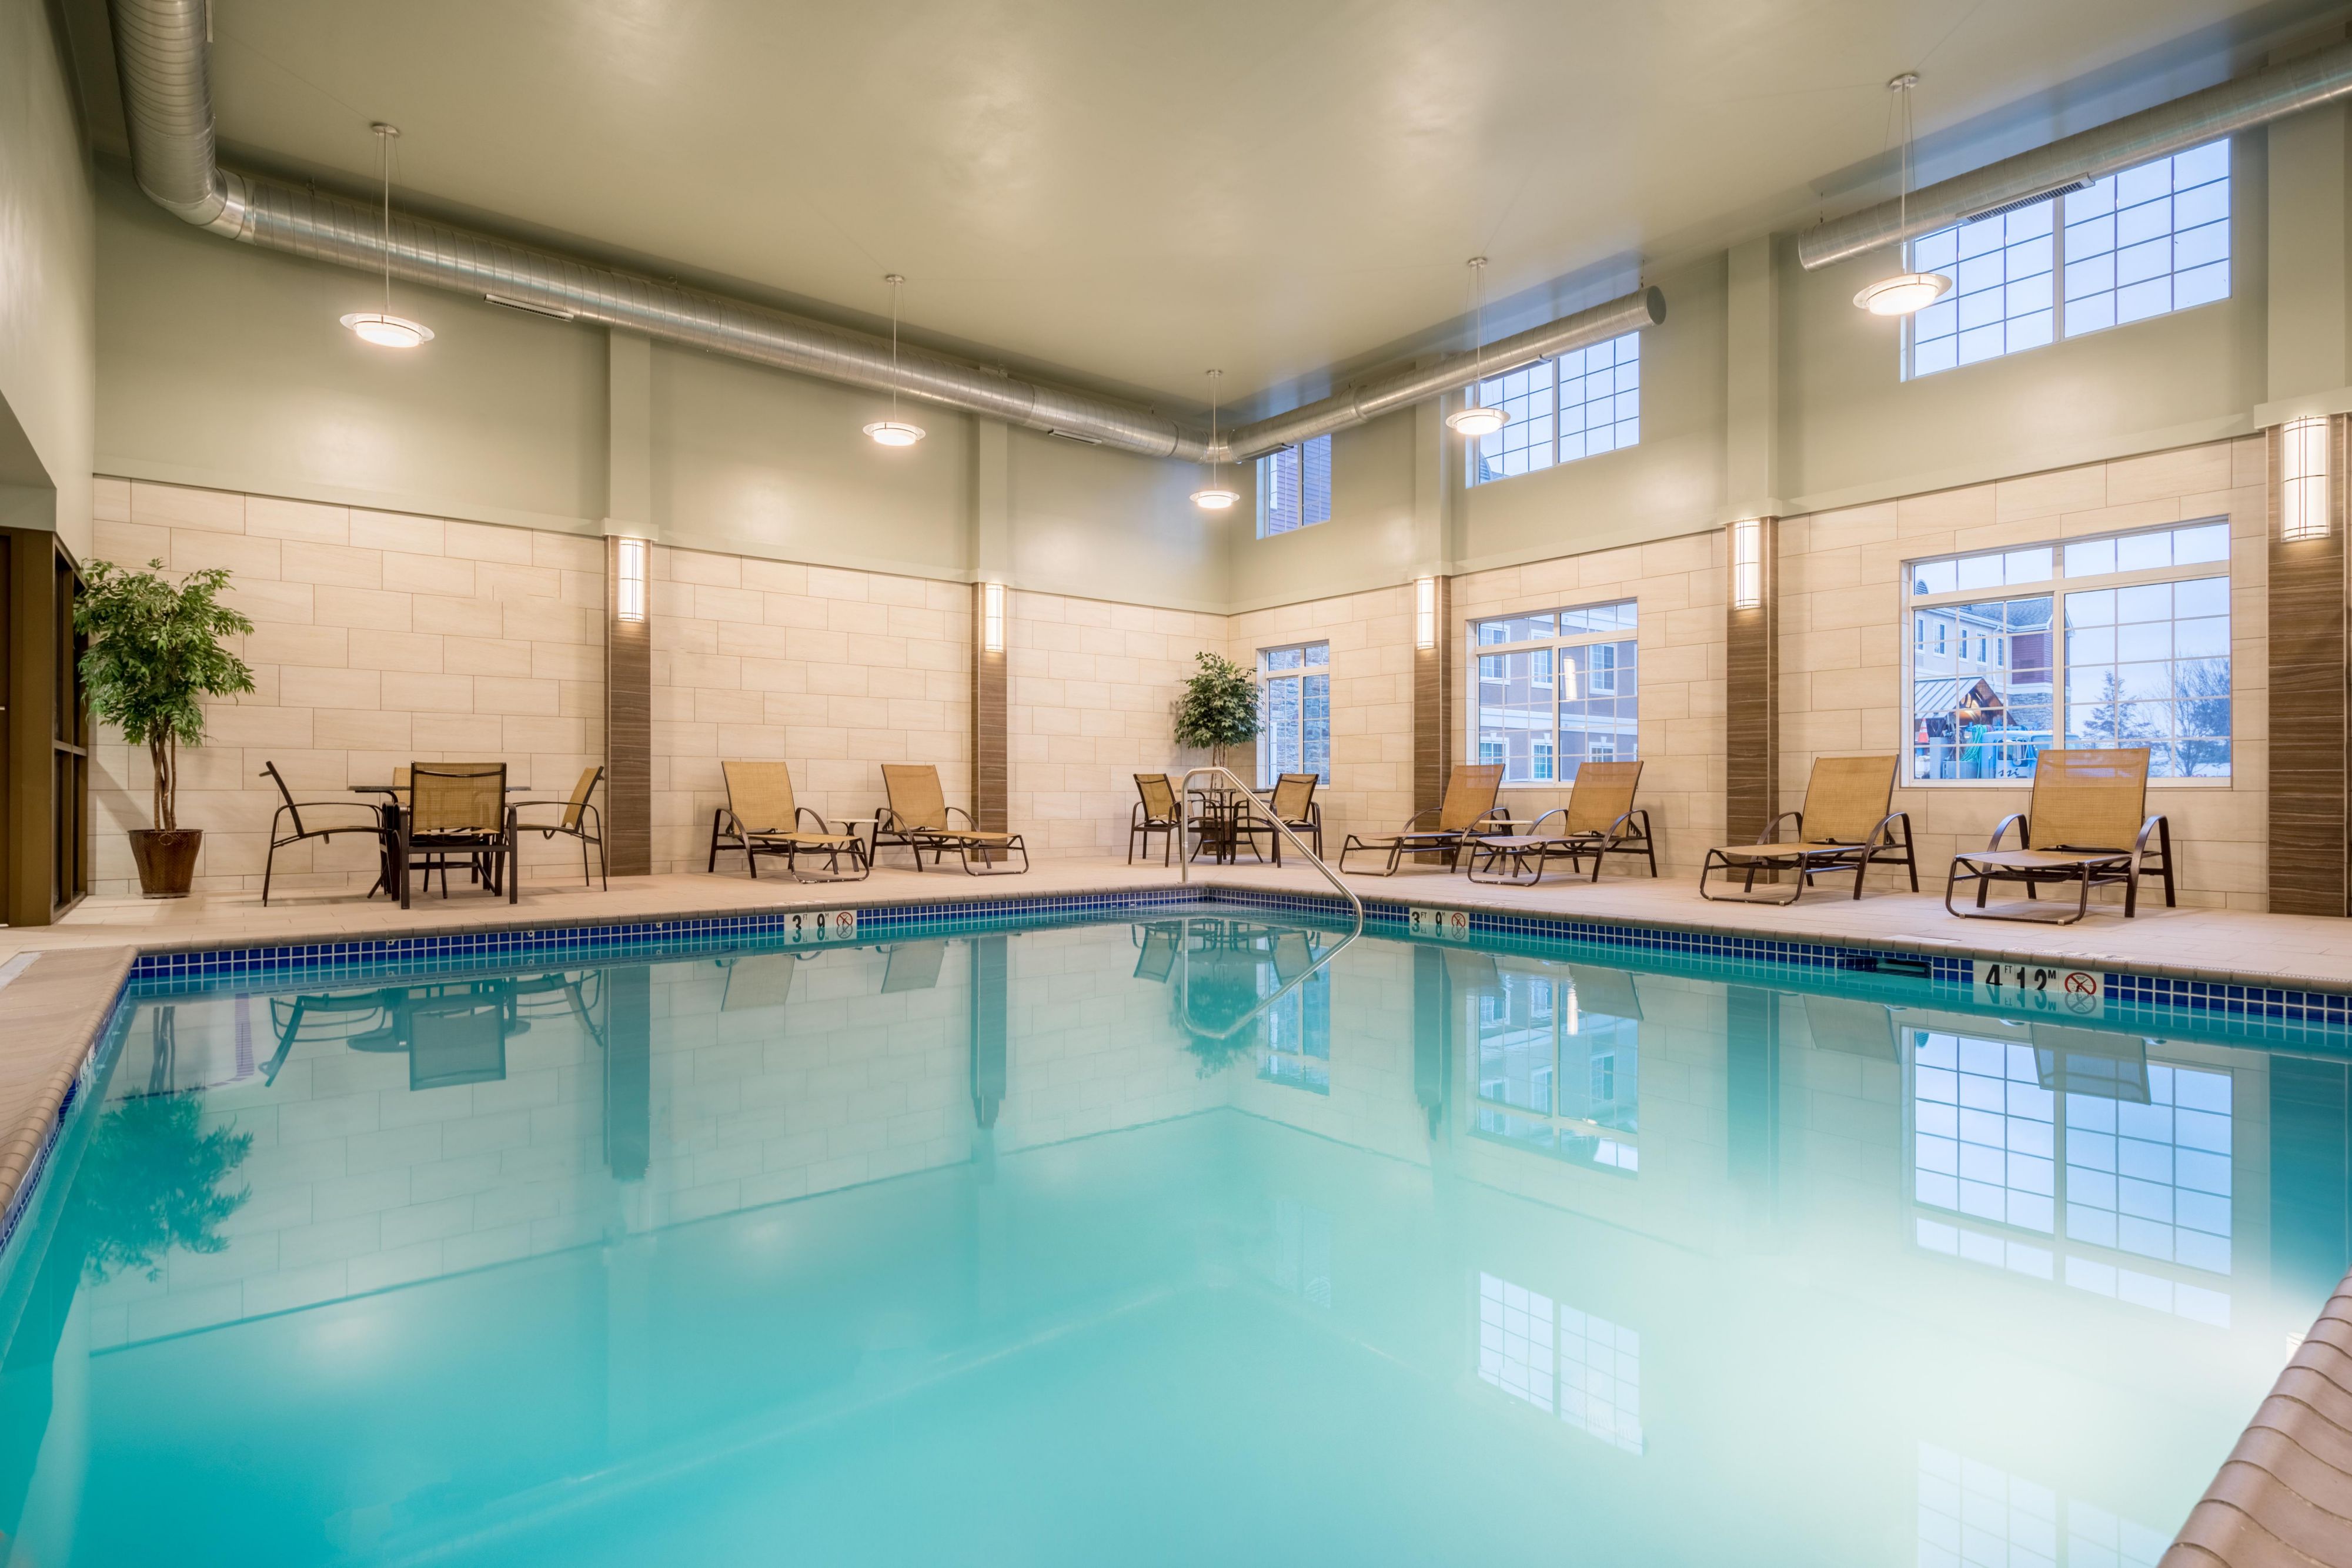 Looking for an indoor pool for fitness or to tire out the kiddos?  Look no further than the Staybridge Suites Allentown, PA!  Book online or call the hotel to secure your room! 